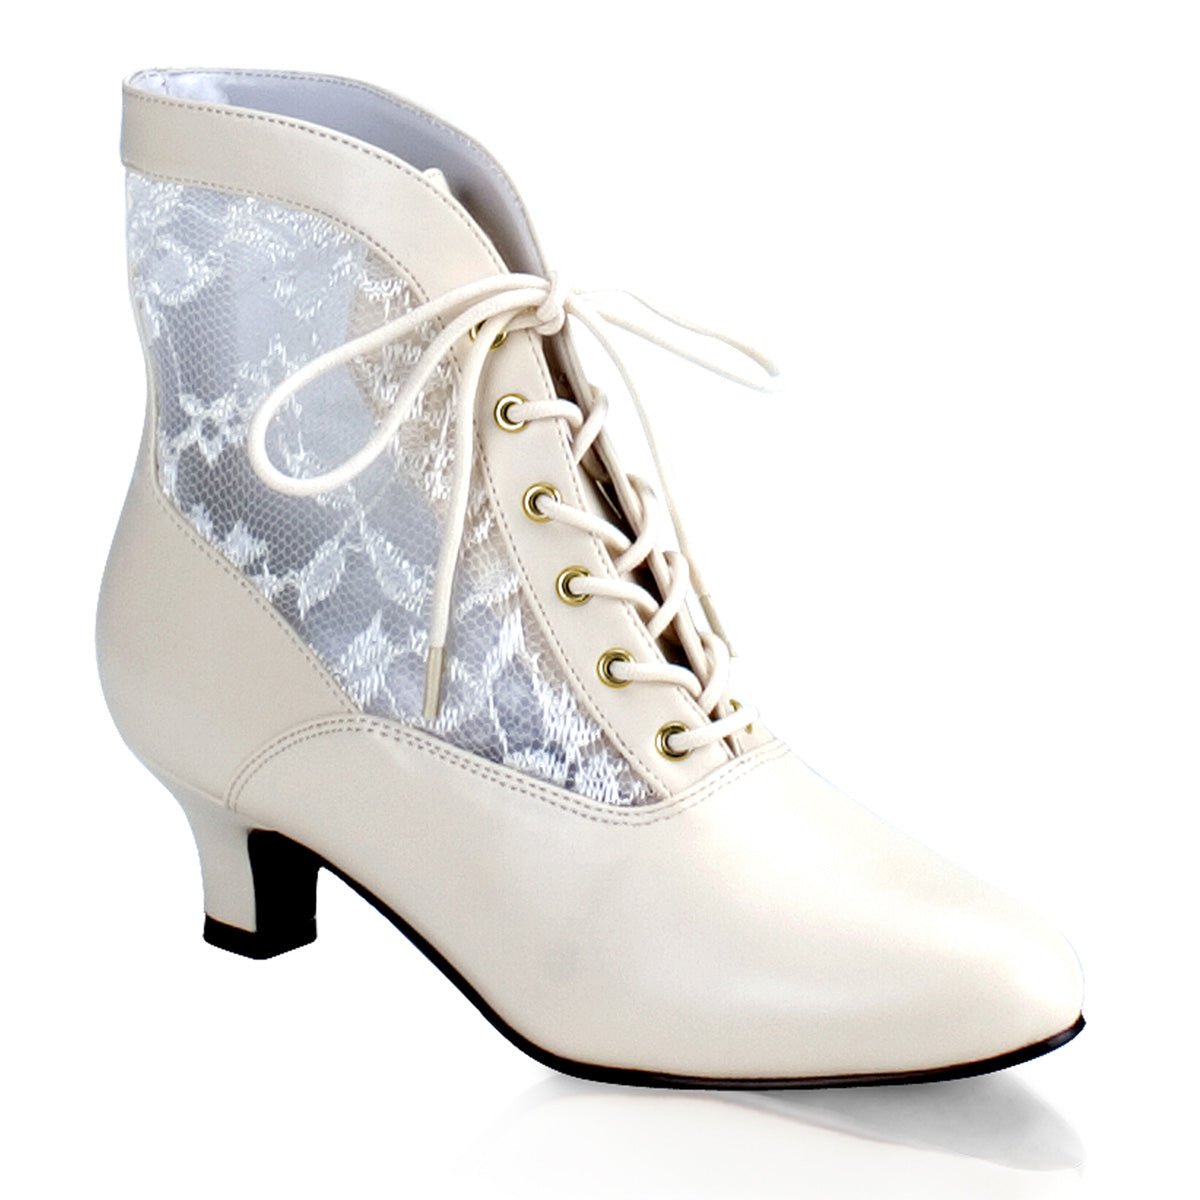 Clearance Funtasma Dame 05 Ivory Size 4UK/7USA - From Clearance Sold By Alternative Footwear